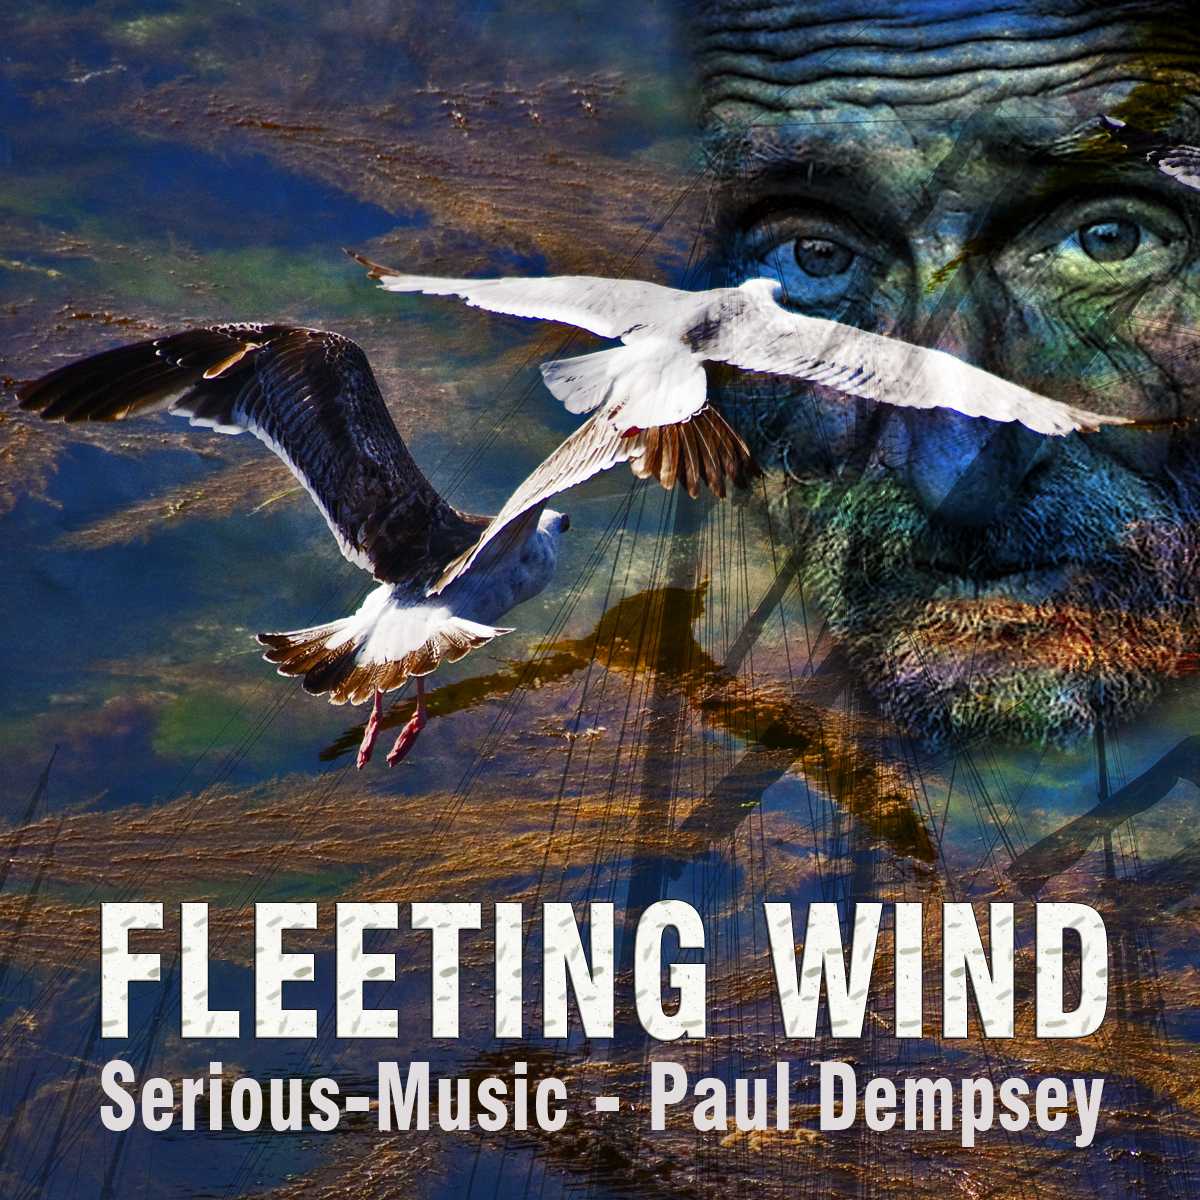 Fleeting Wind feat. Paul Dempsey - Album ECHOES OF YESTERDAY